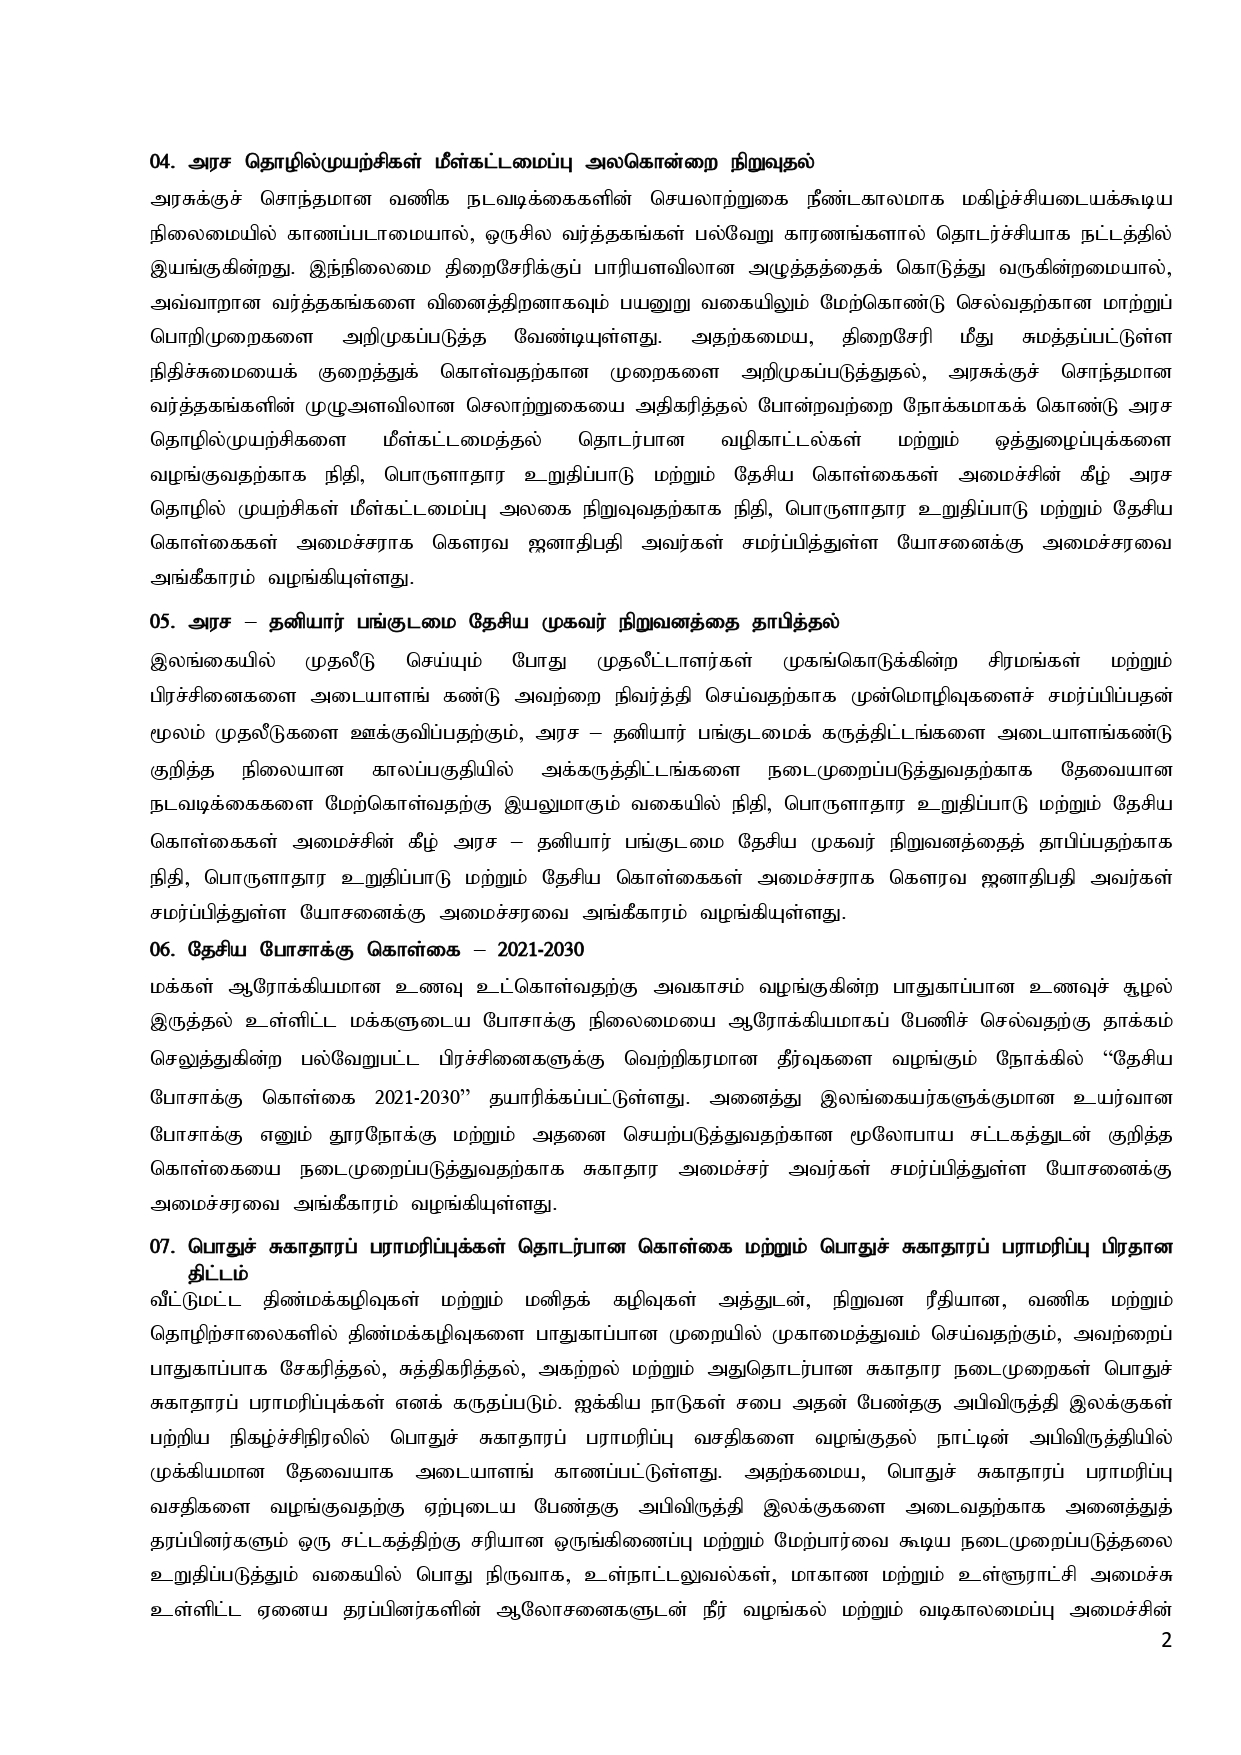 Cabinet Decisions on 05.09.2022 Tamil page 0002